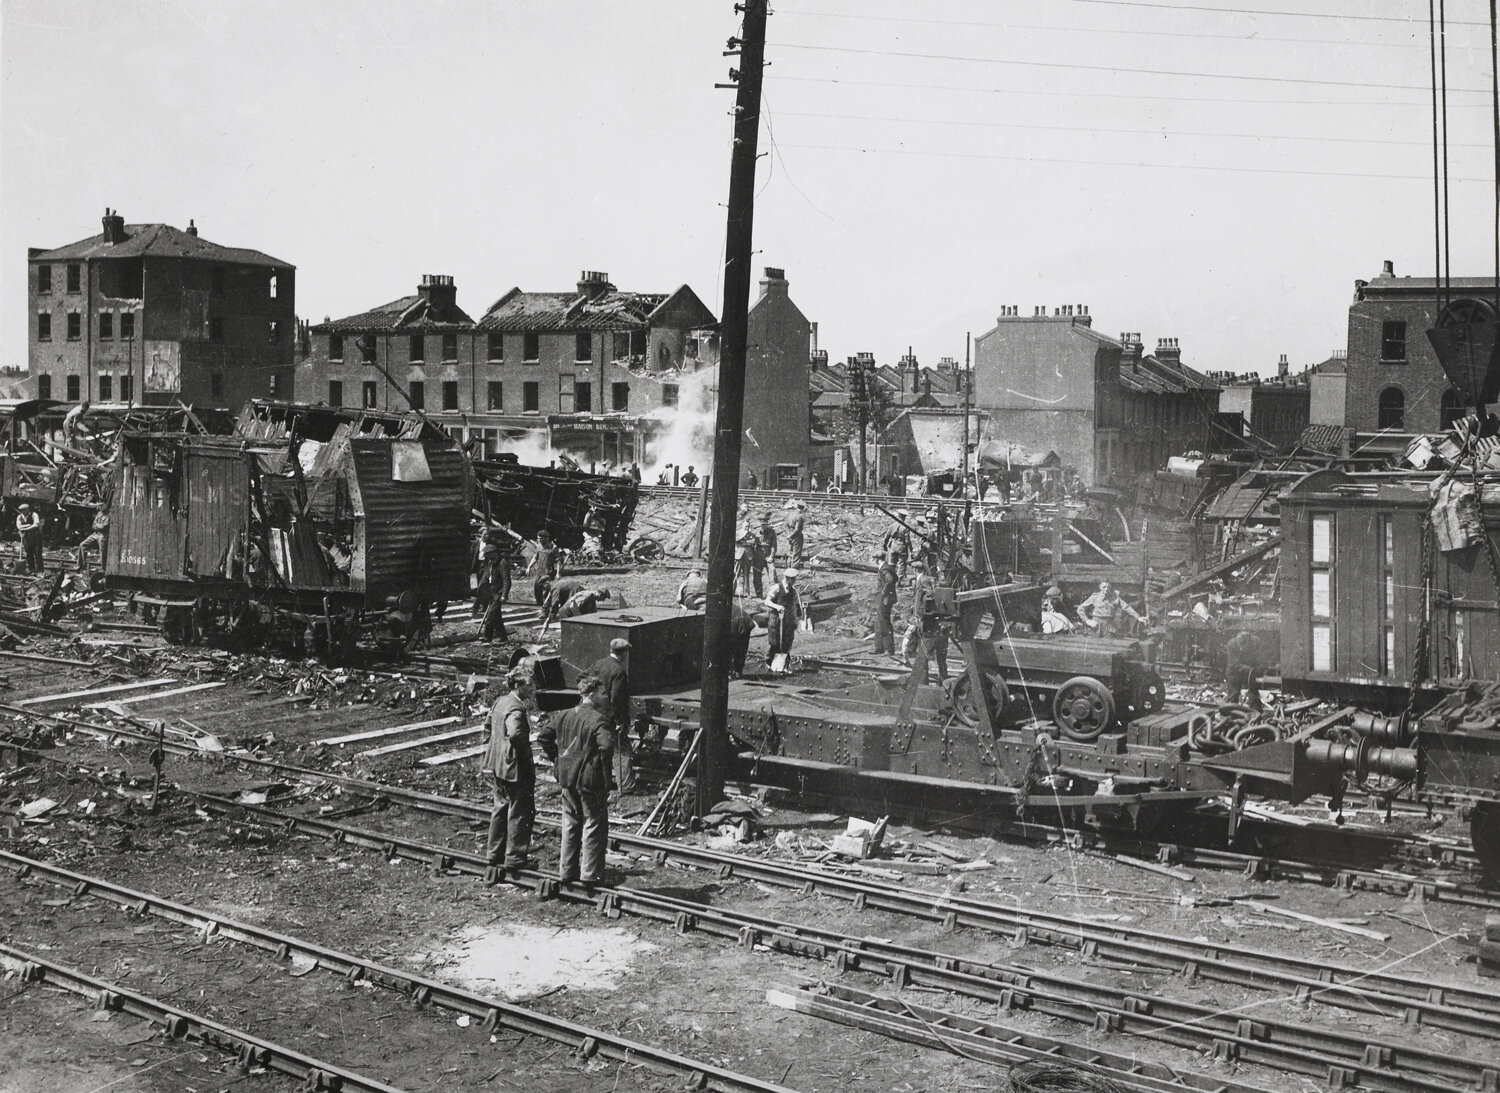 Damage caused by a V1 rocket that hit Royal Victoria Dock, 1944